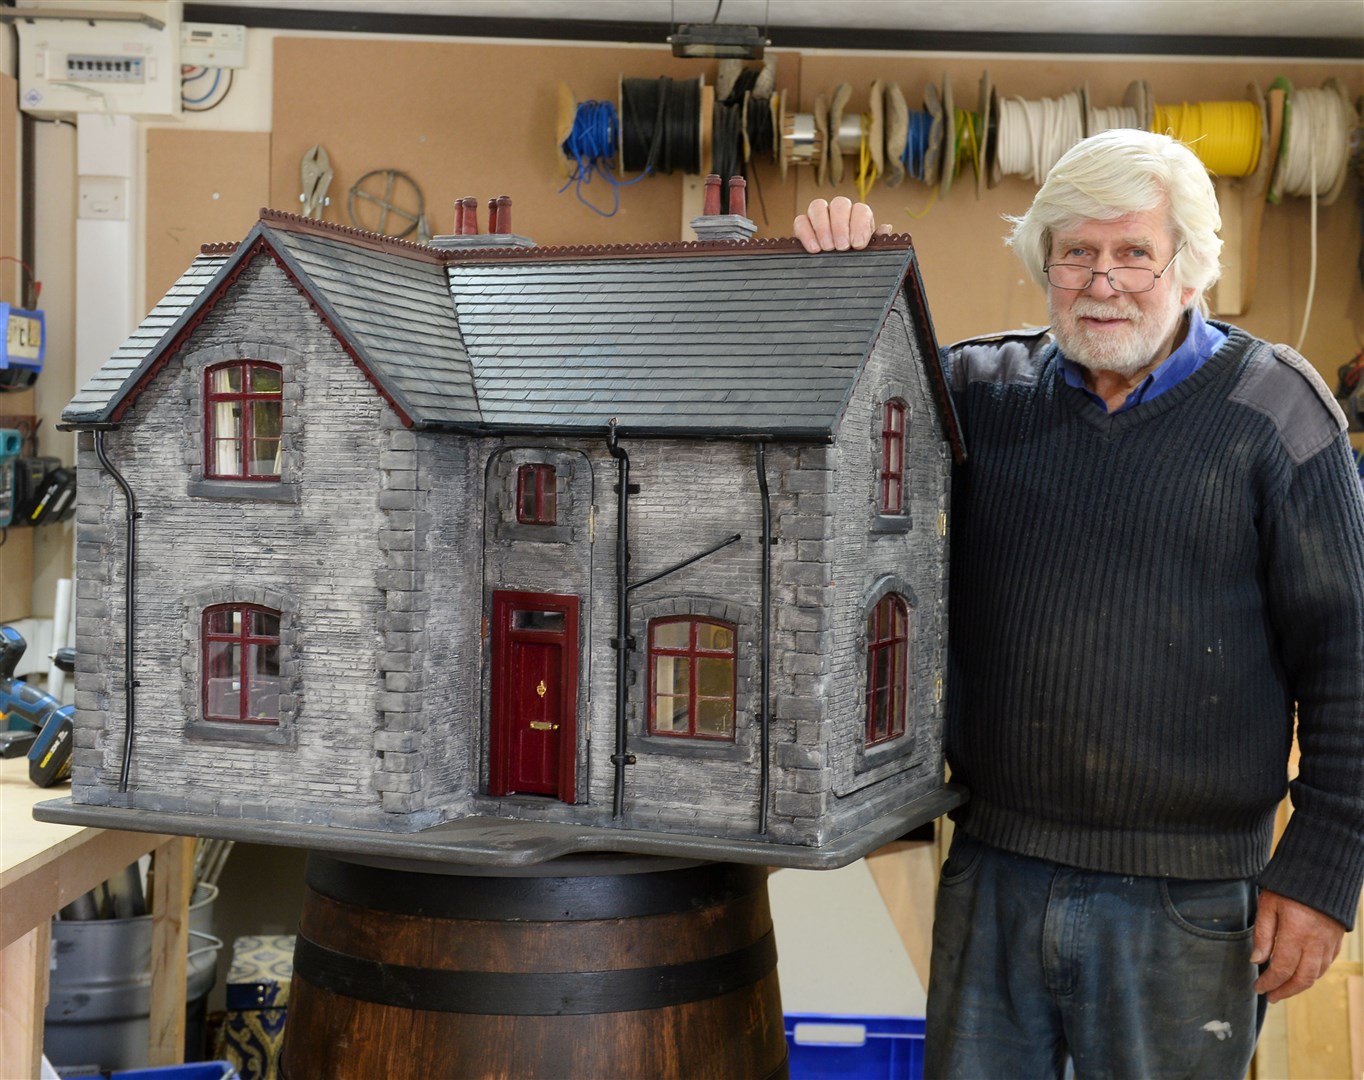 Mr Howker spent hundreds of hours creating the doll's house during lockdown. Picture: Gary Anthony